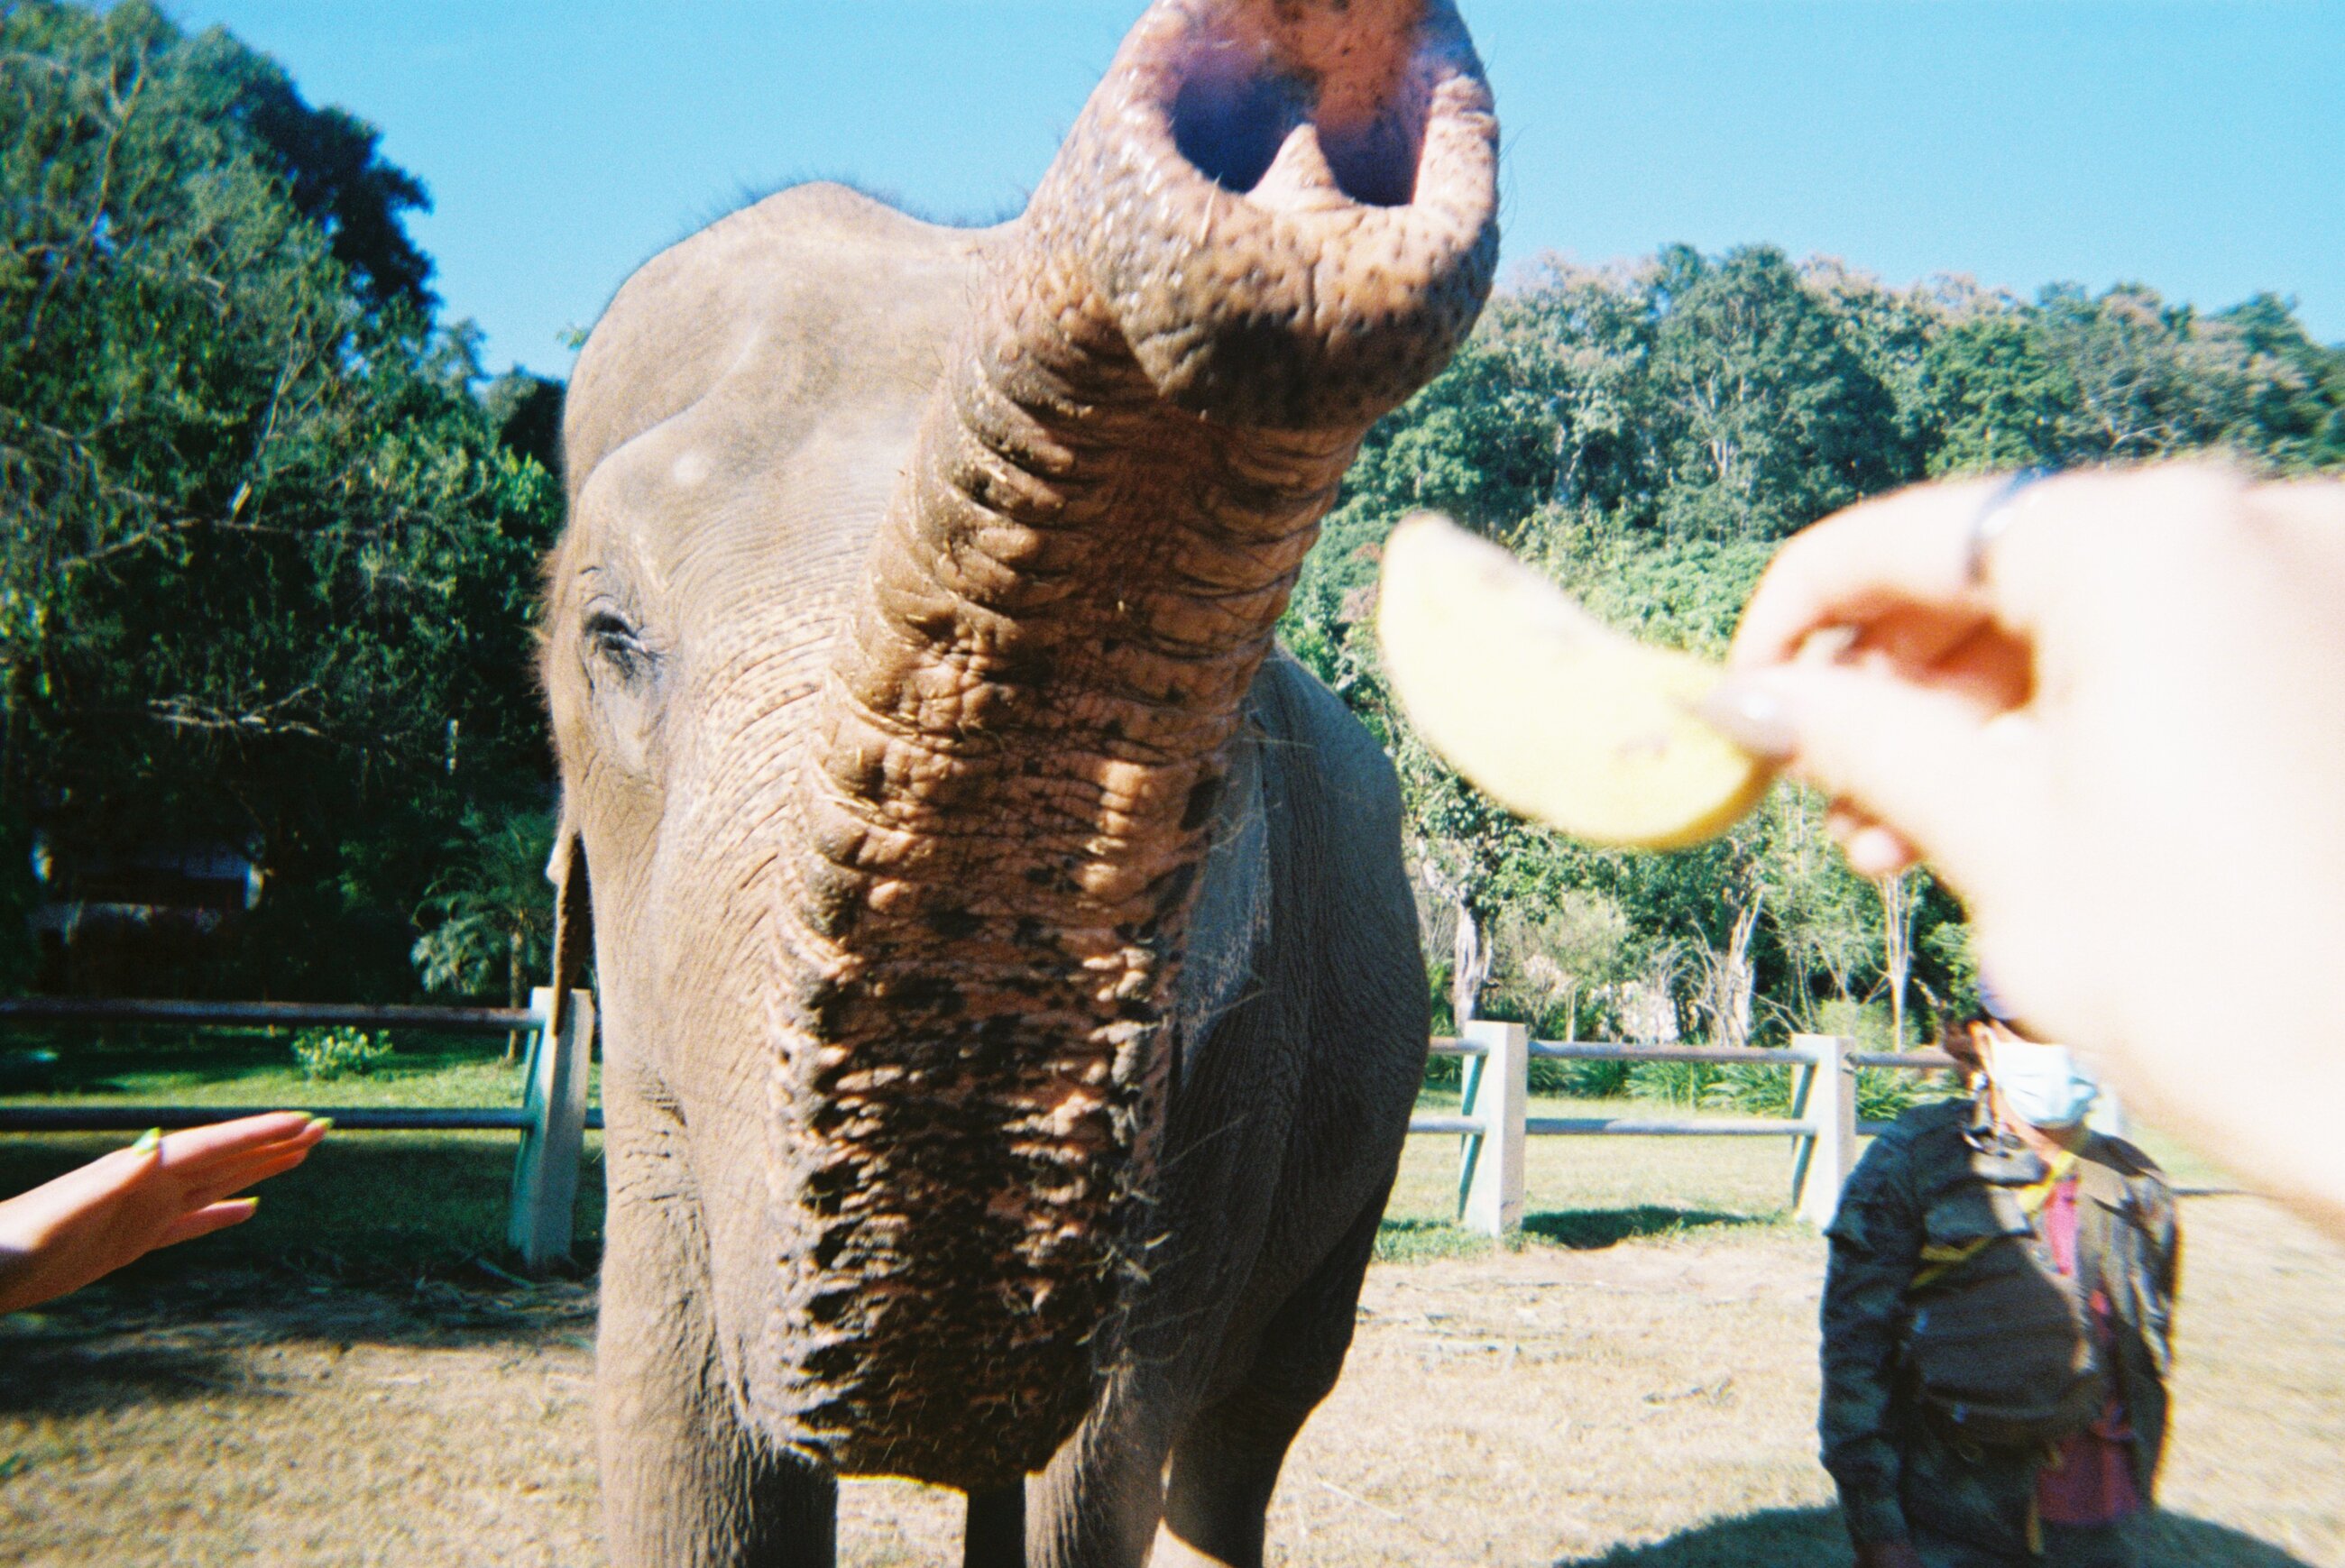 You HAVE TO visit an Elephant Sanctuary; we were able to visit this one in Chiang Mai over a long weekend! We fed, bathed, and learned more about one of Thailand's most amazing creatures(: